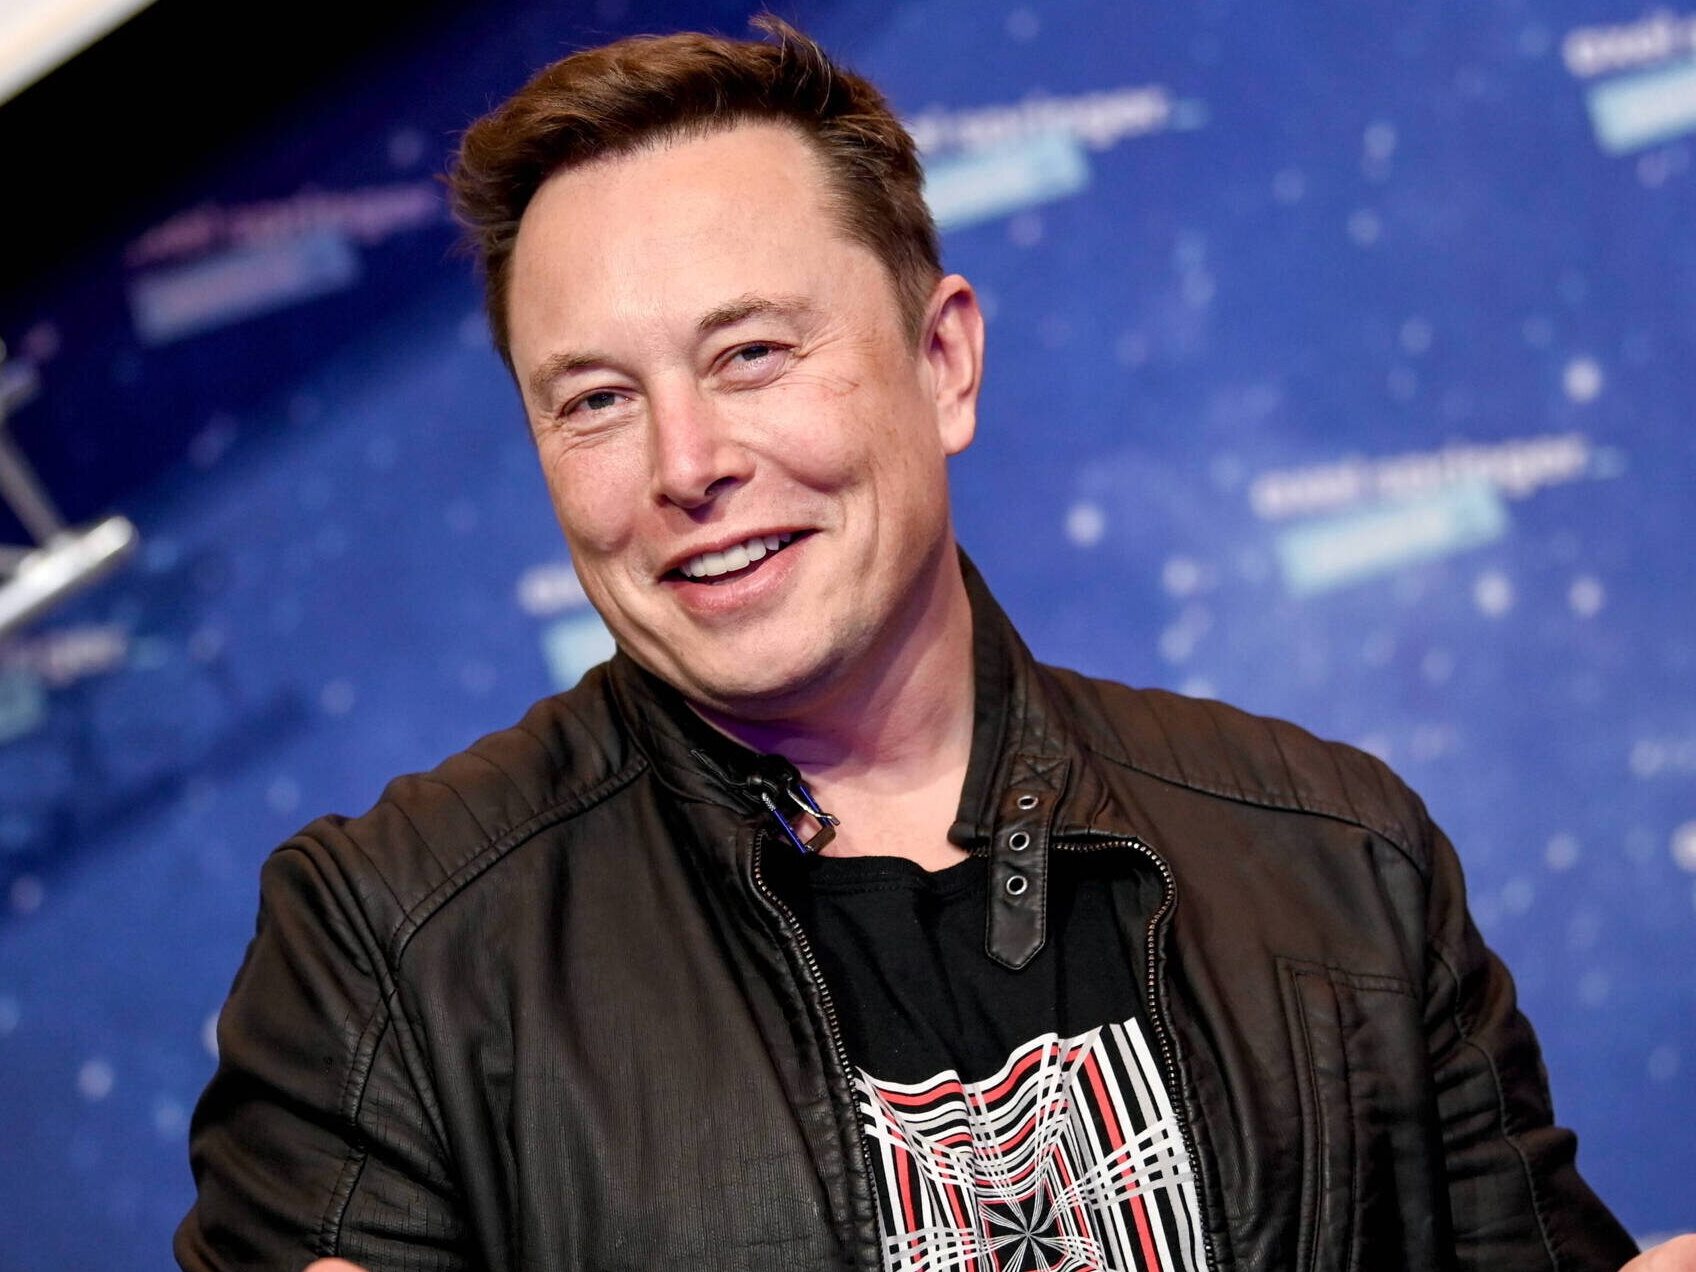 Elon Musk wants to replace Twitter with his own platform